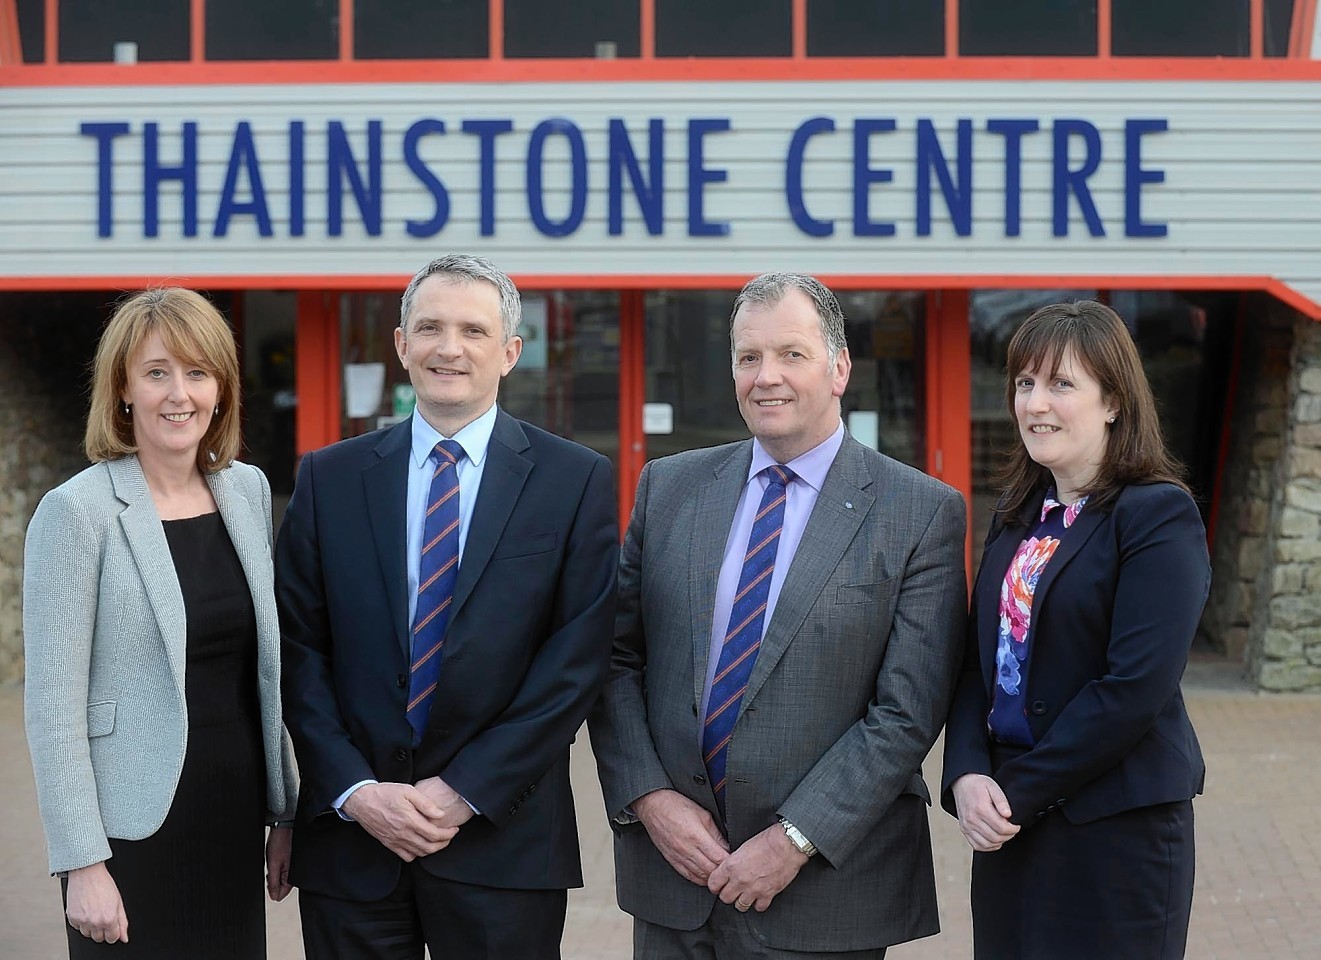 The ANM Group executive team - Avril McLeod, Grant Rogerson, John Gregor and Alison Green.